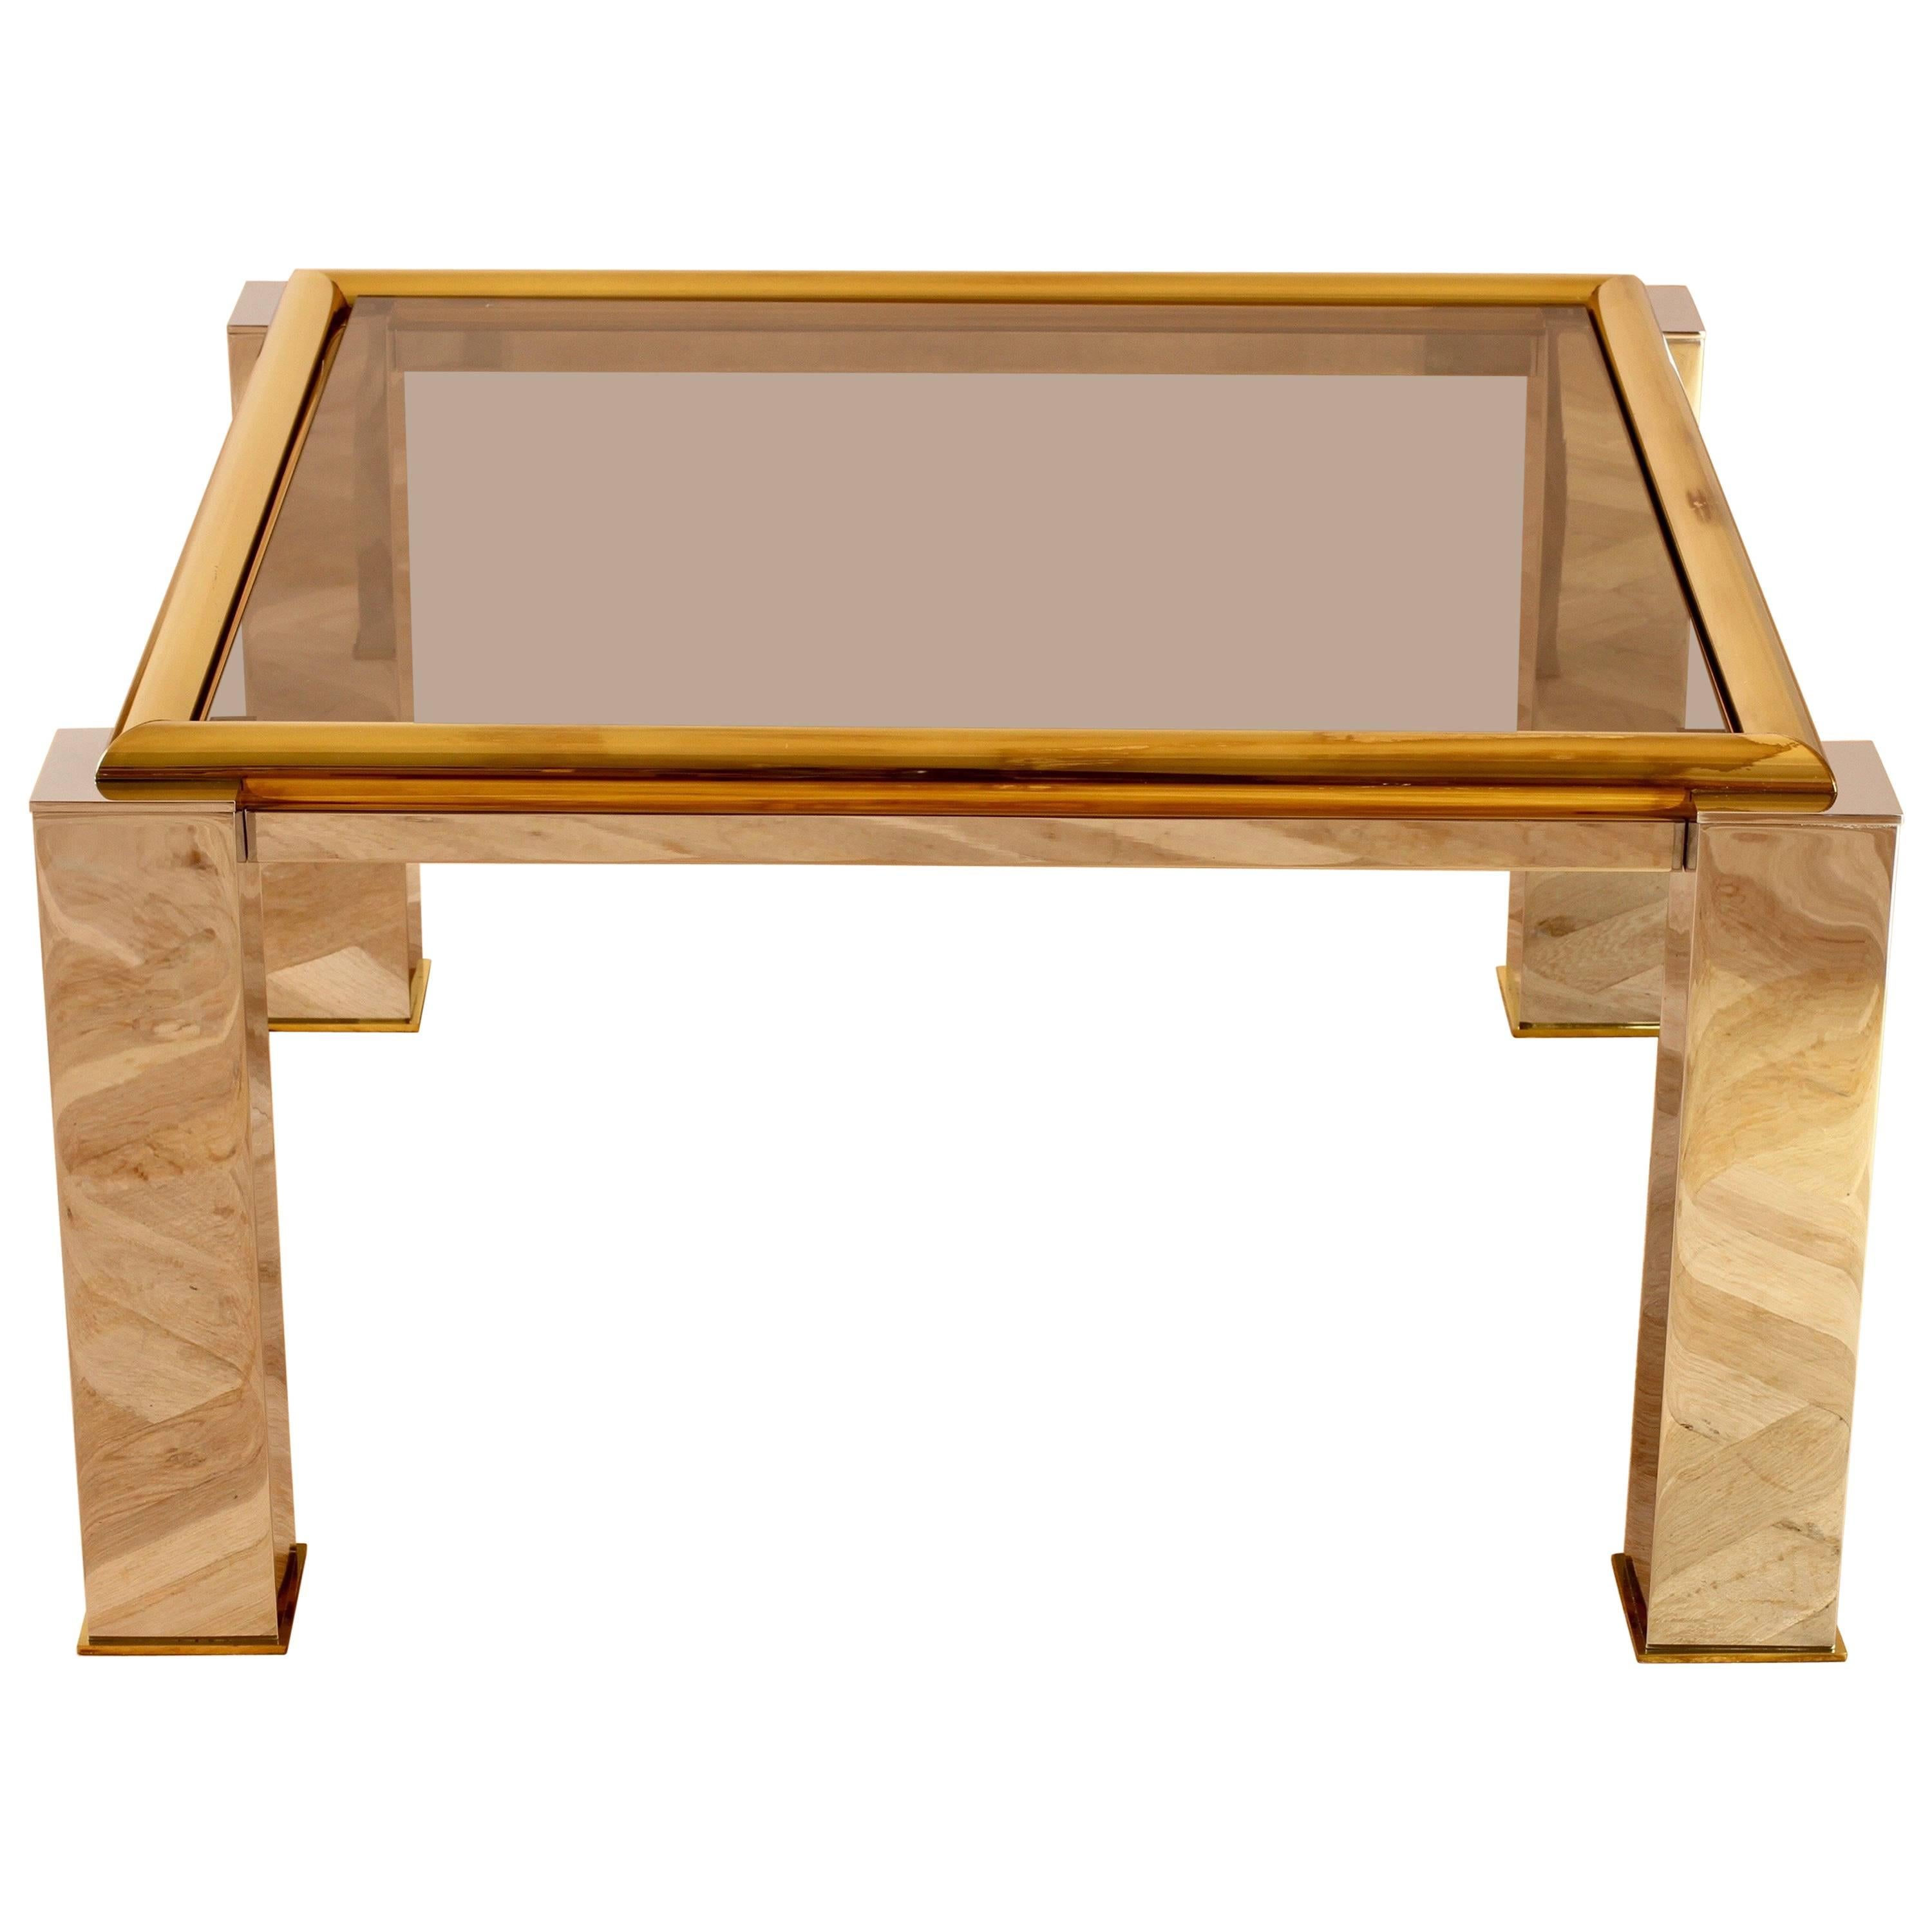 Large bicolor or bicolour square centre coffee table with a smoked glass table top 